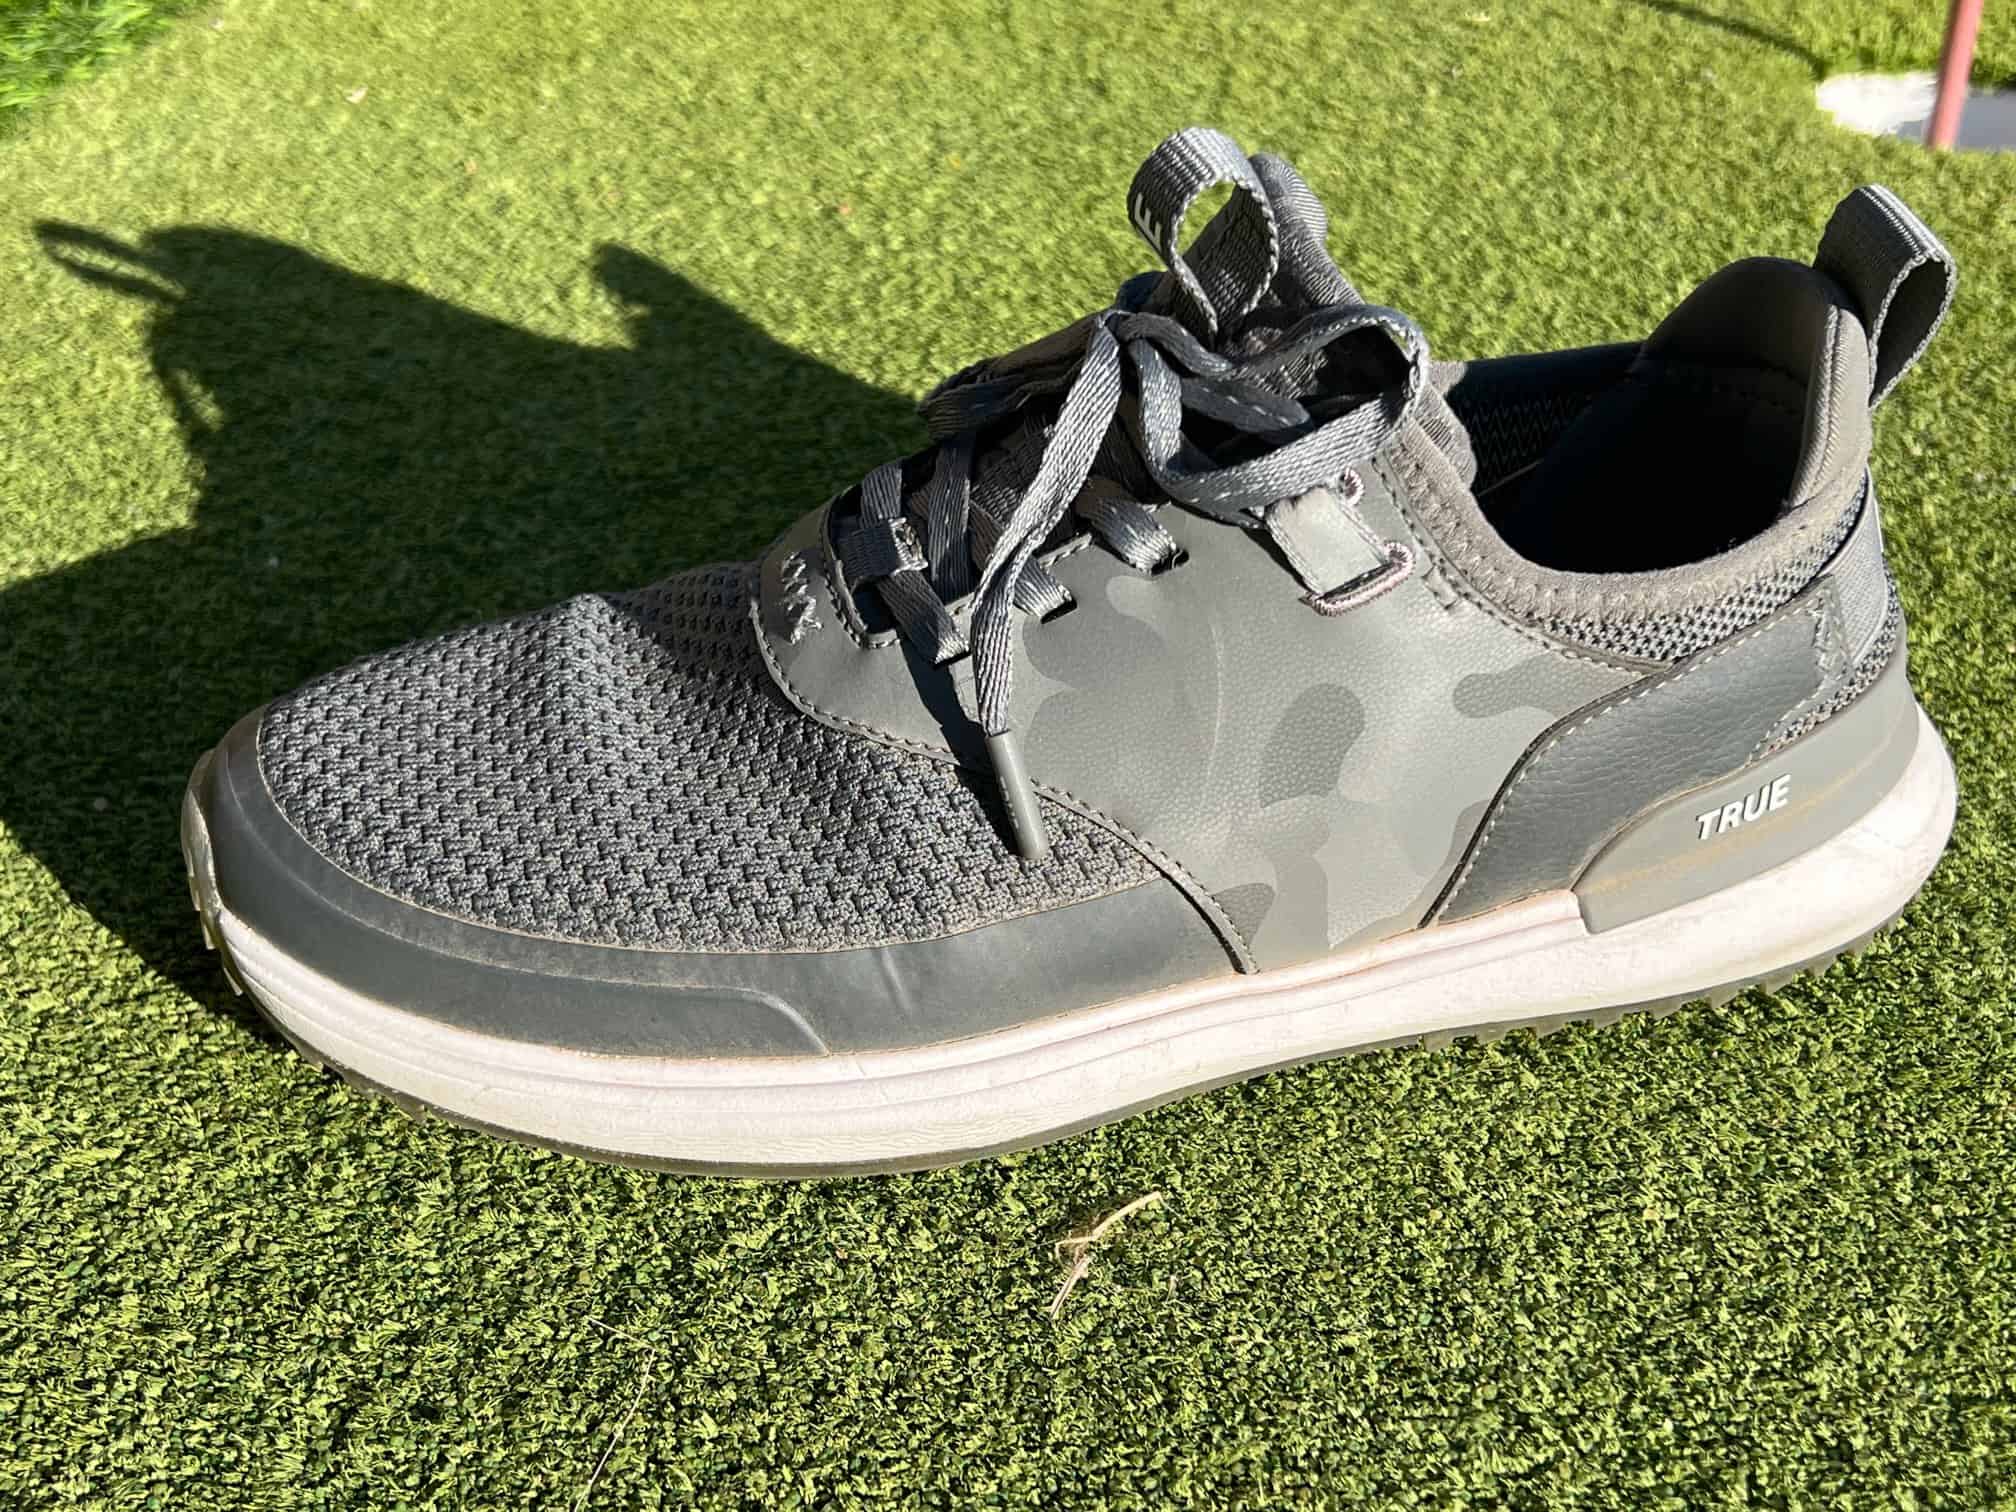 TRUE LUX Hybrid Shoes Review - Independent Golf Reviews